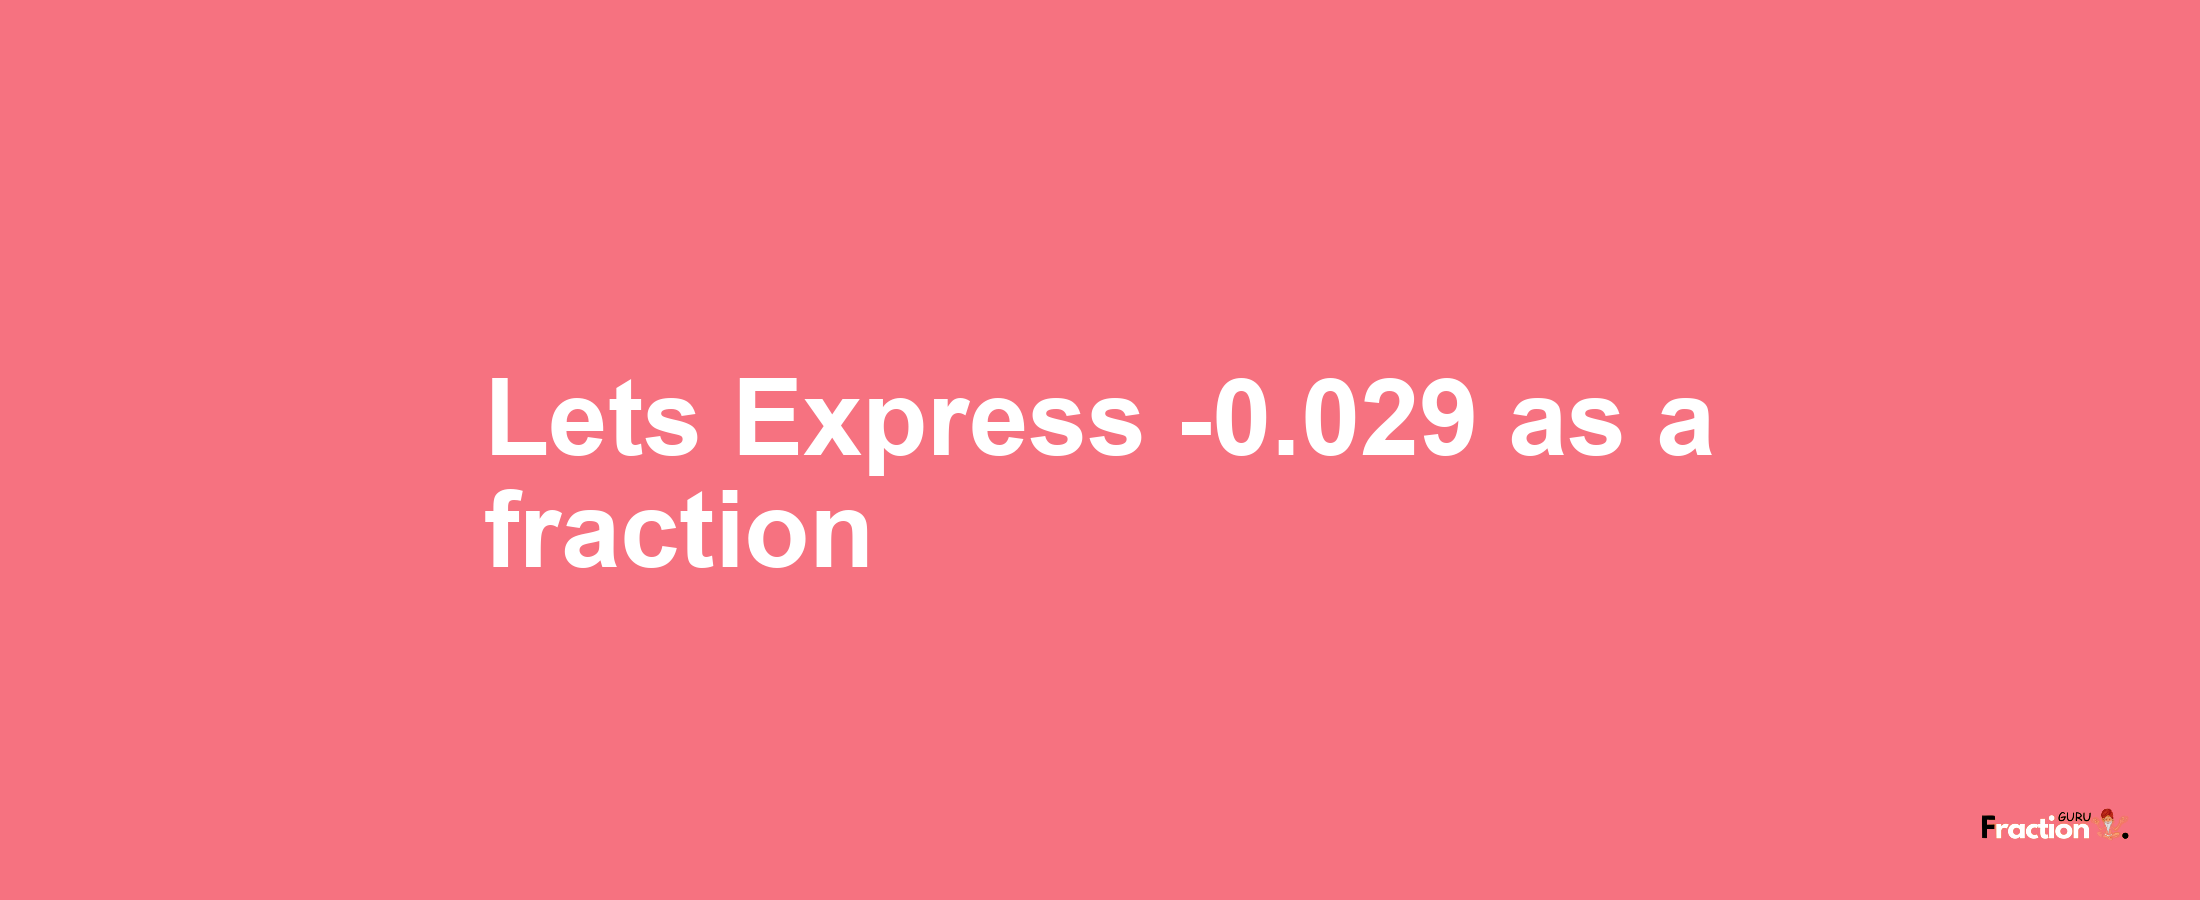 Lets Express -0.029 as afraction